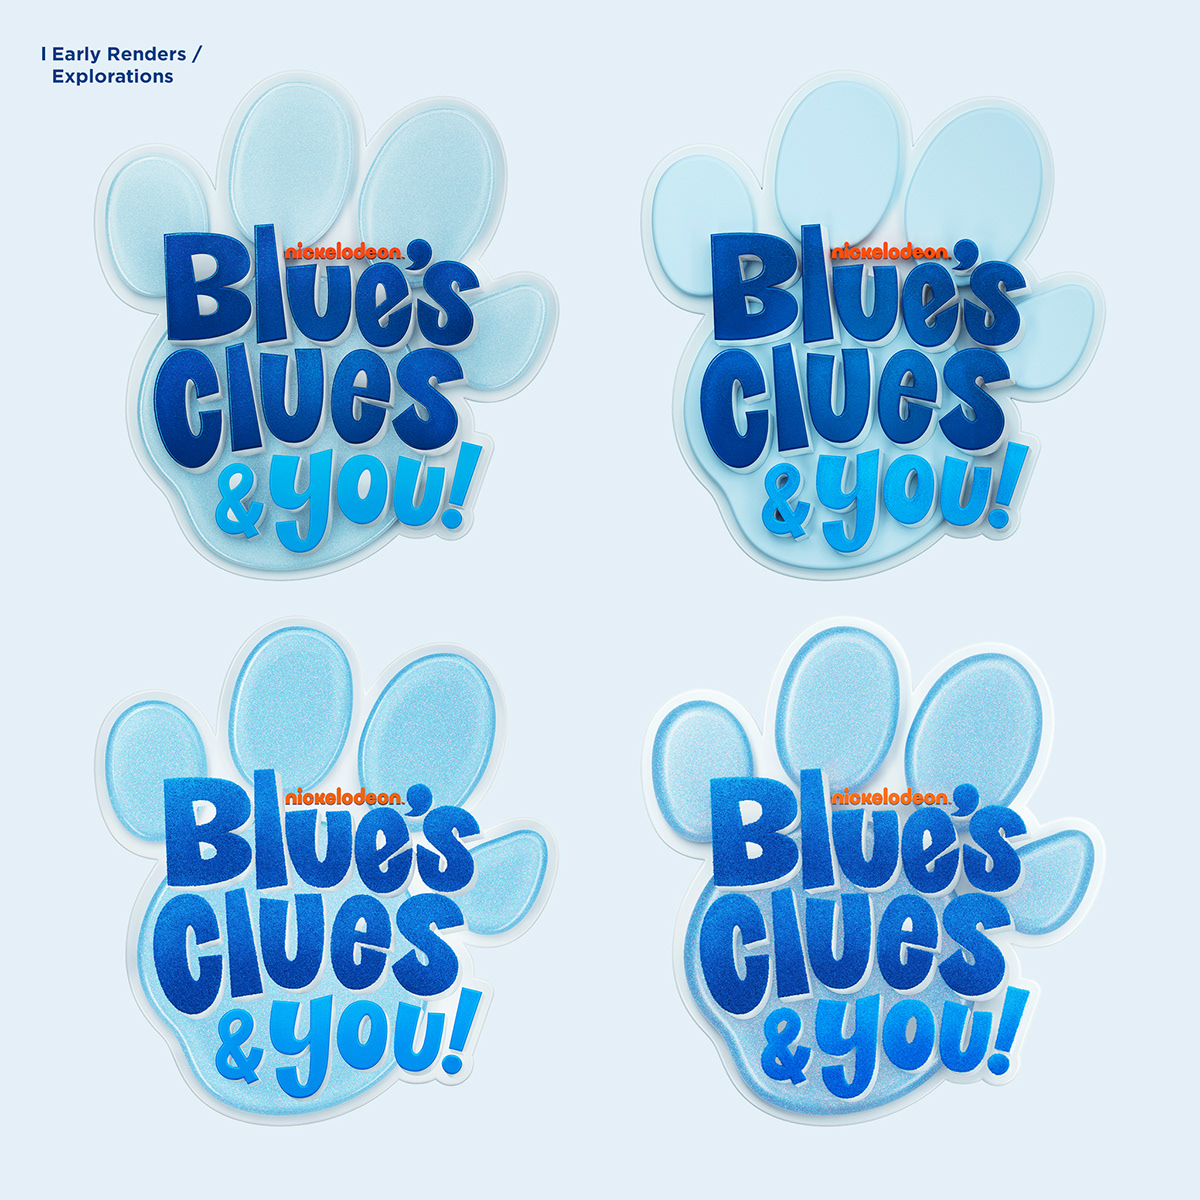 Nickelodeon's New Show Blues Clues & You!'s Logo.